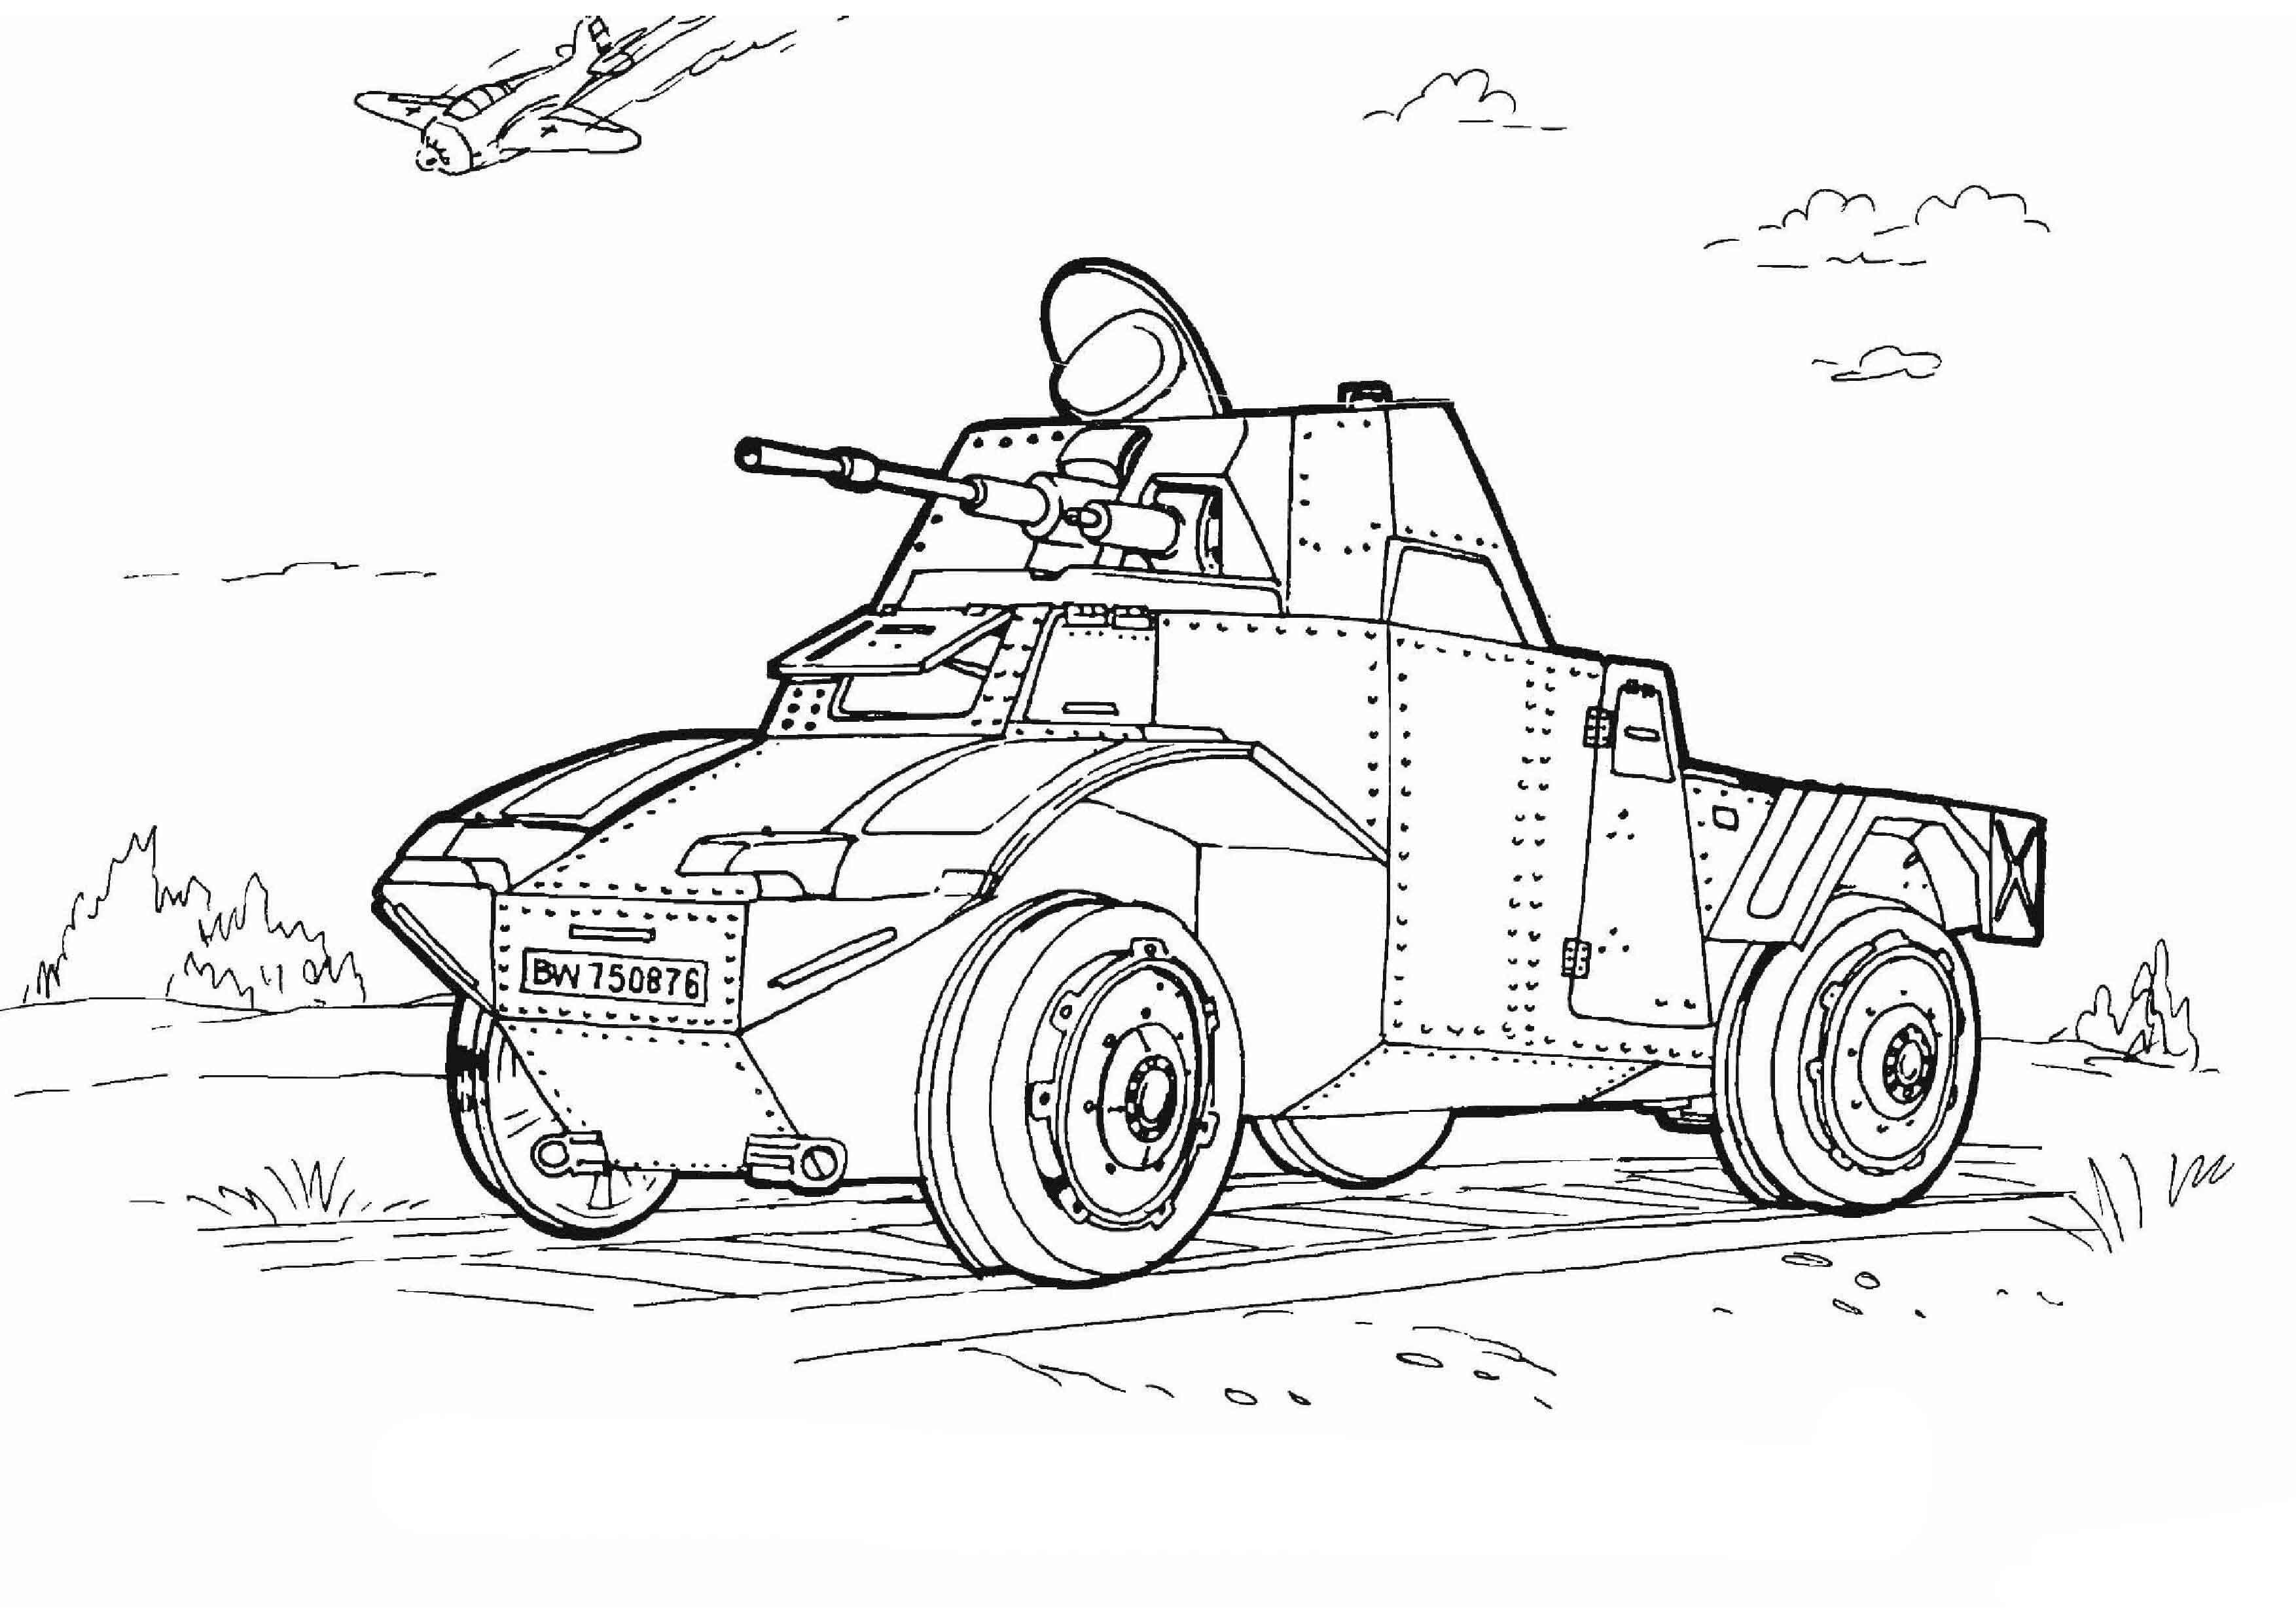 Army Vehicle Coloring Pages - Army Military